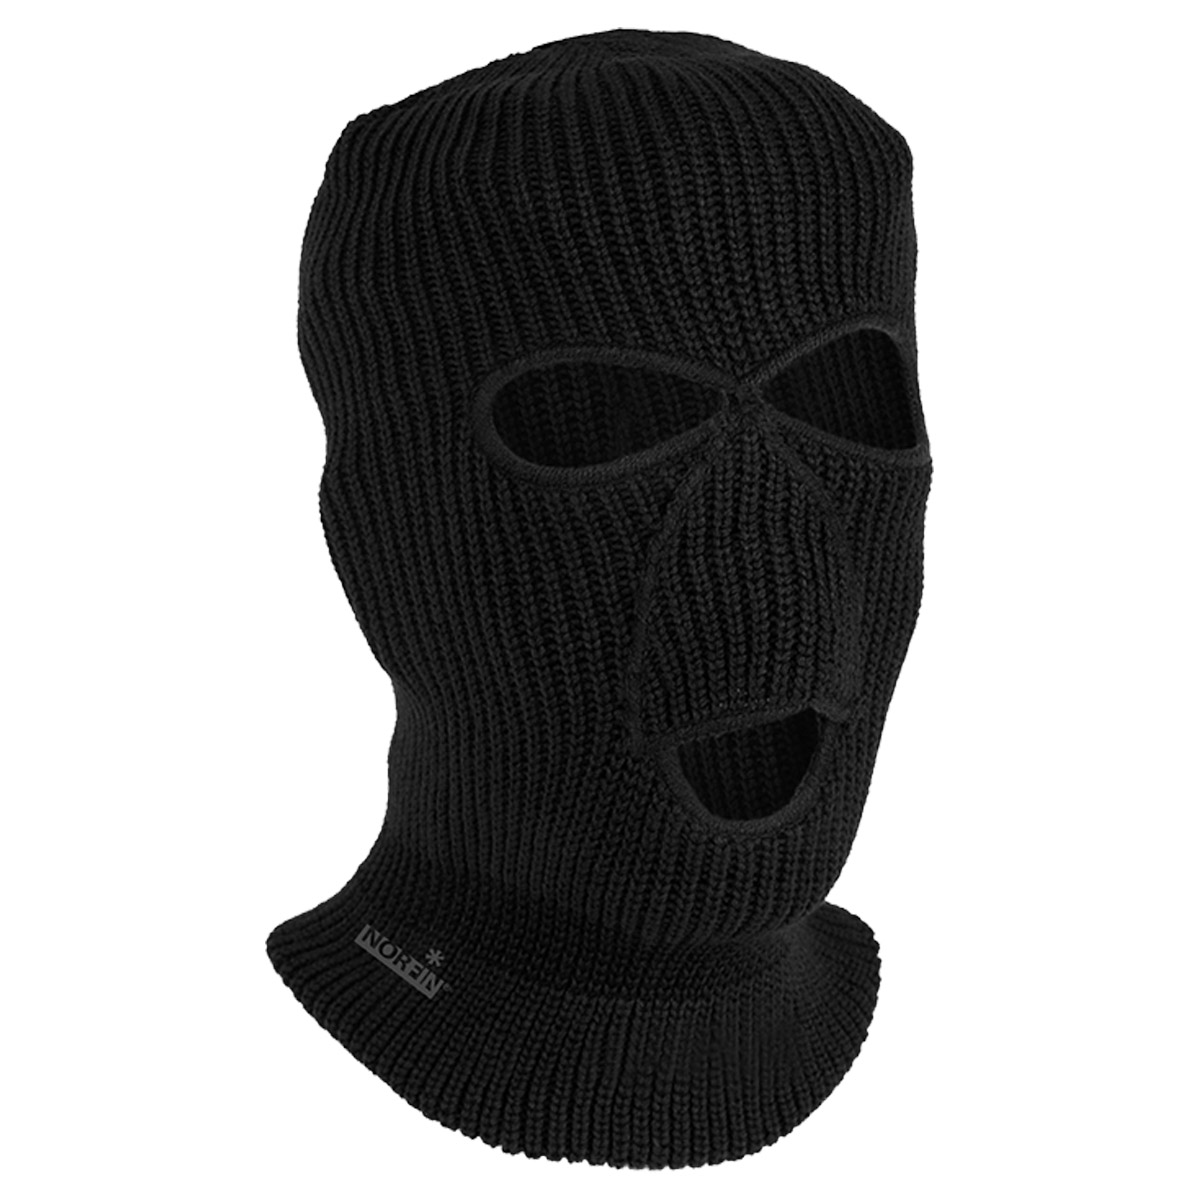 Norfin Mask Knitted Black